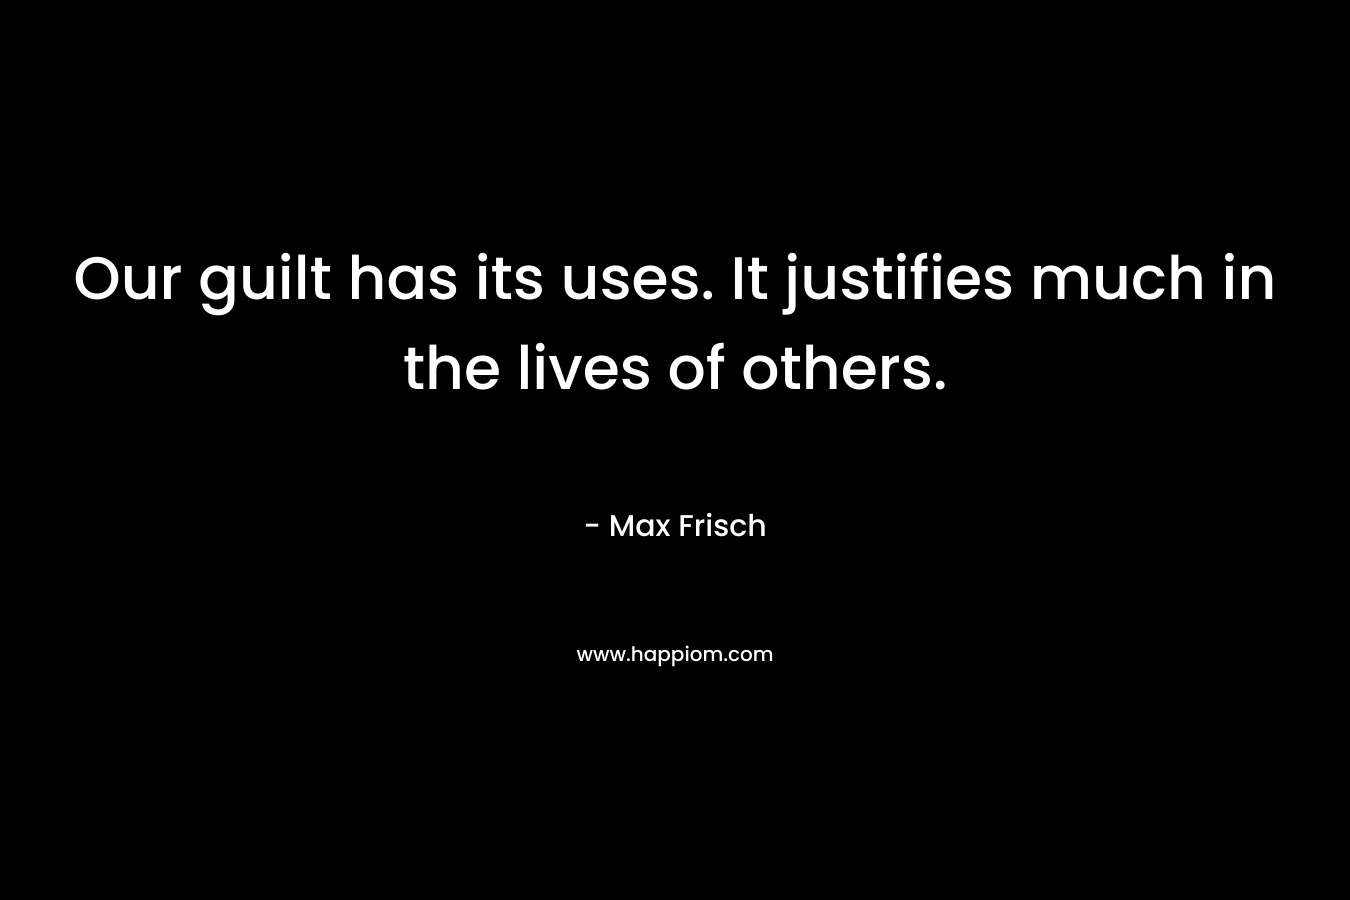 Our guilt has its uses. It justifies much in the lives of others. – Max Frisch